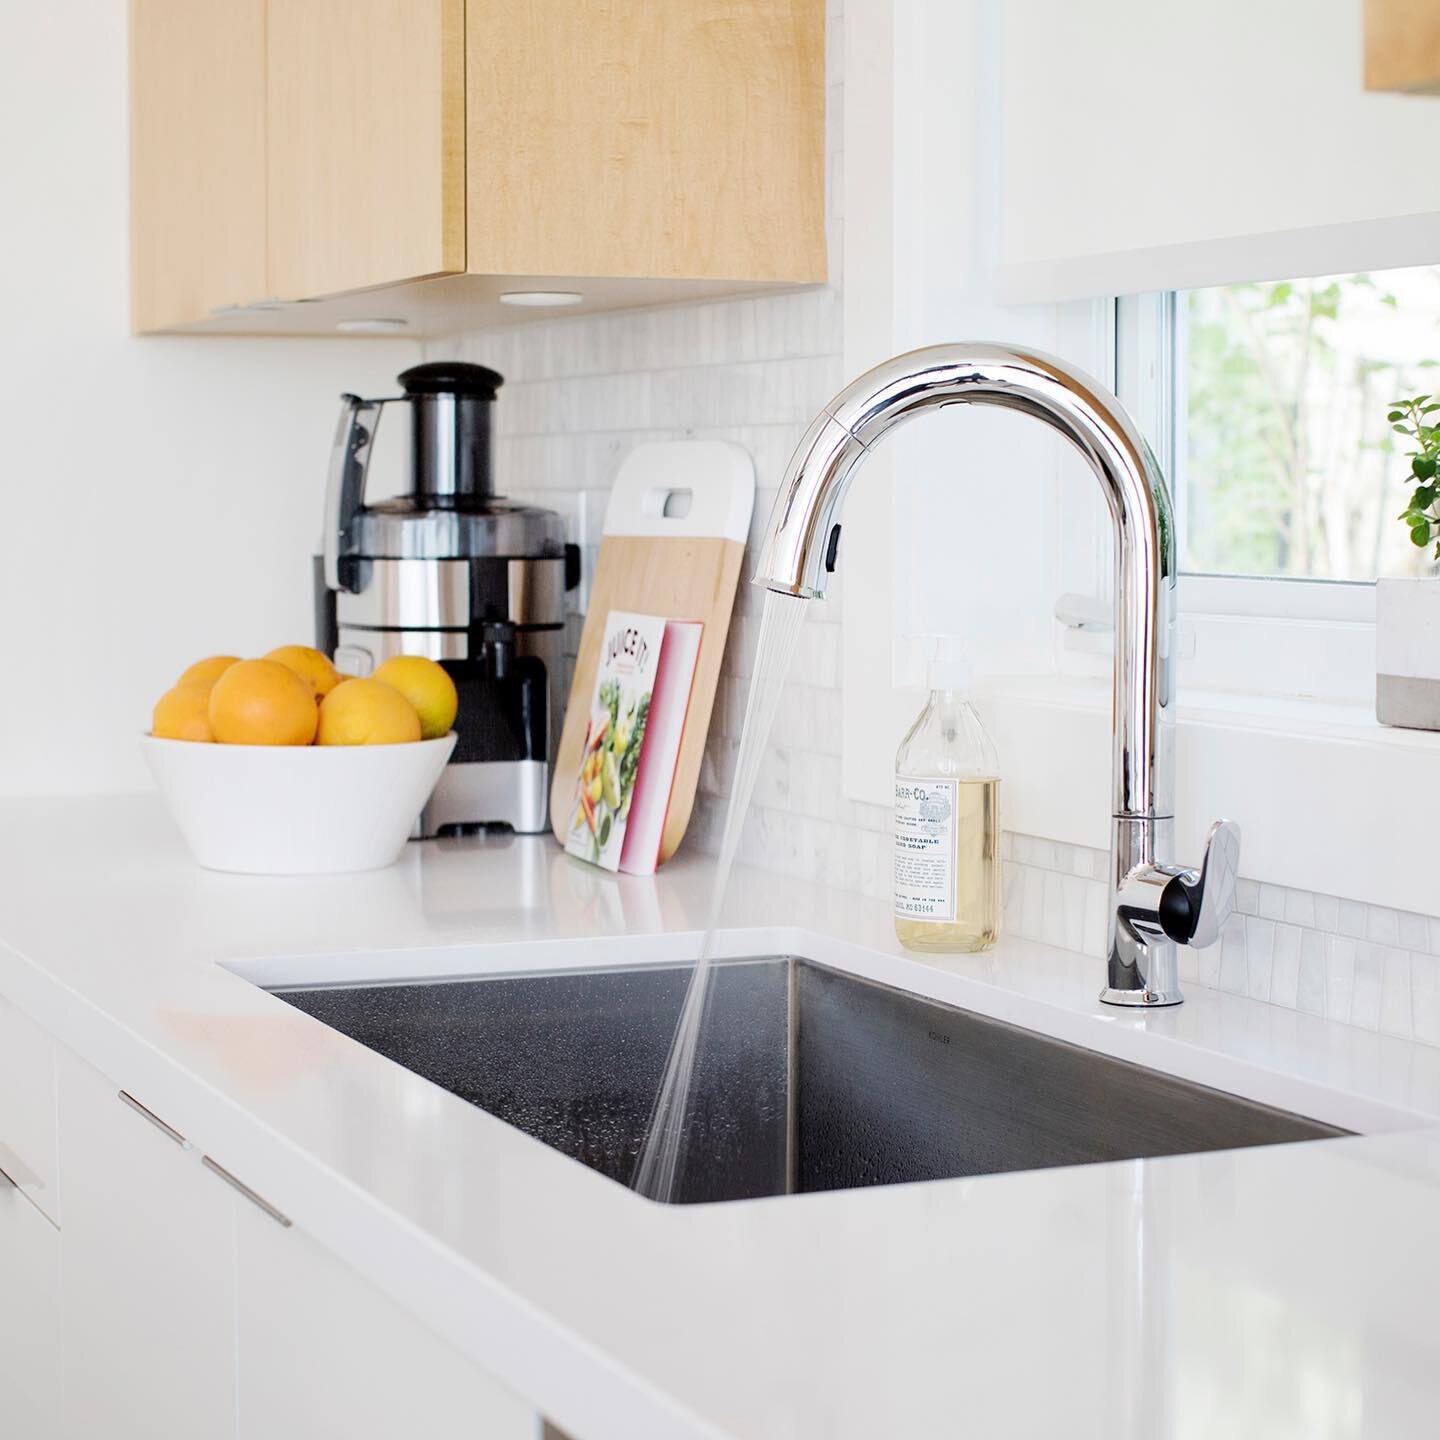 Looking for countertops and sink combinations? Check out the 8 unique options posted here.